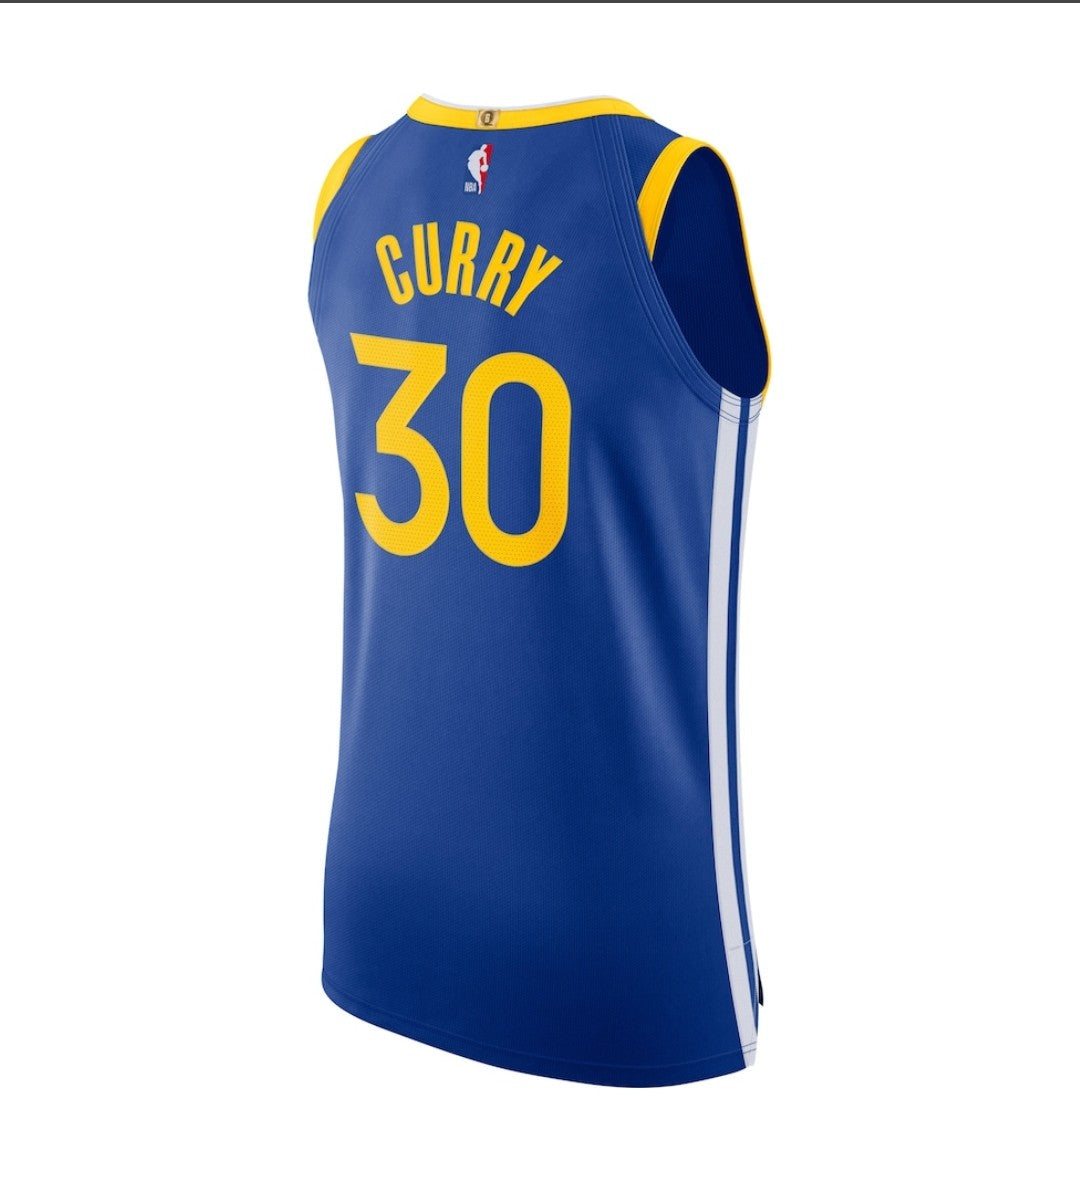 Officially Licensed Gear

Men's Golden State Warriors Nike Blue 2020/21 Authentic Stephen Curry Jersey - Icon Edition